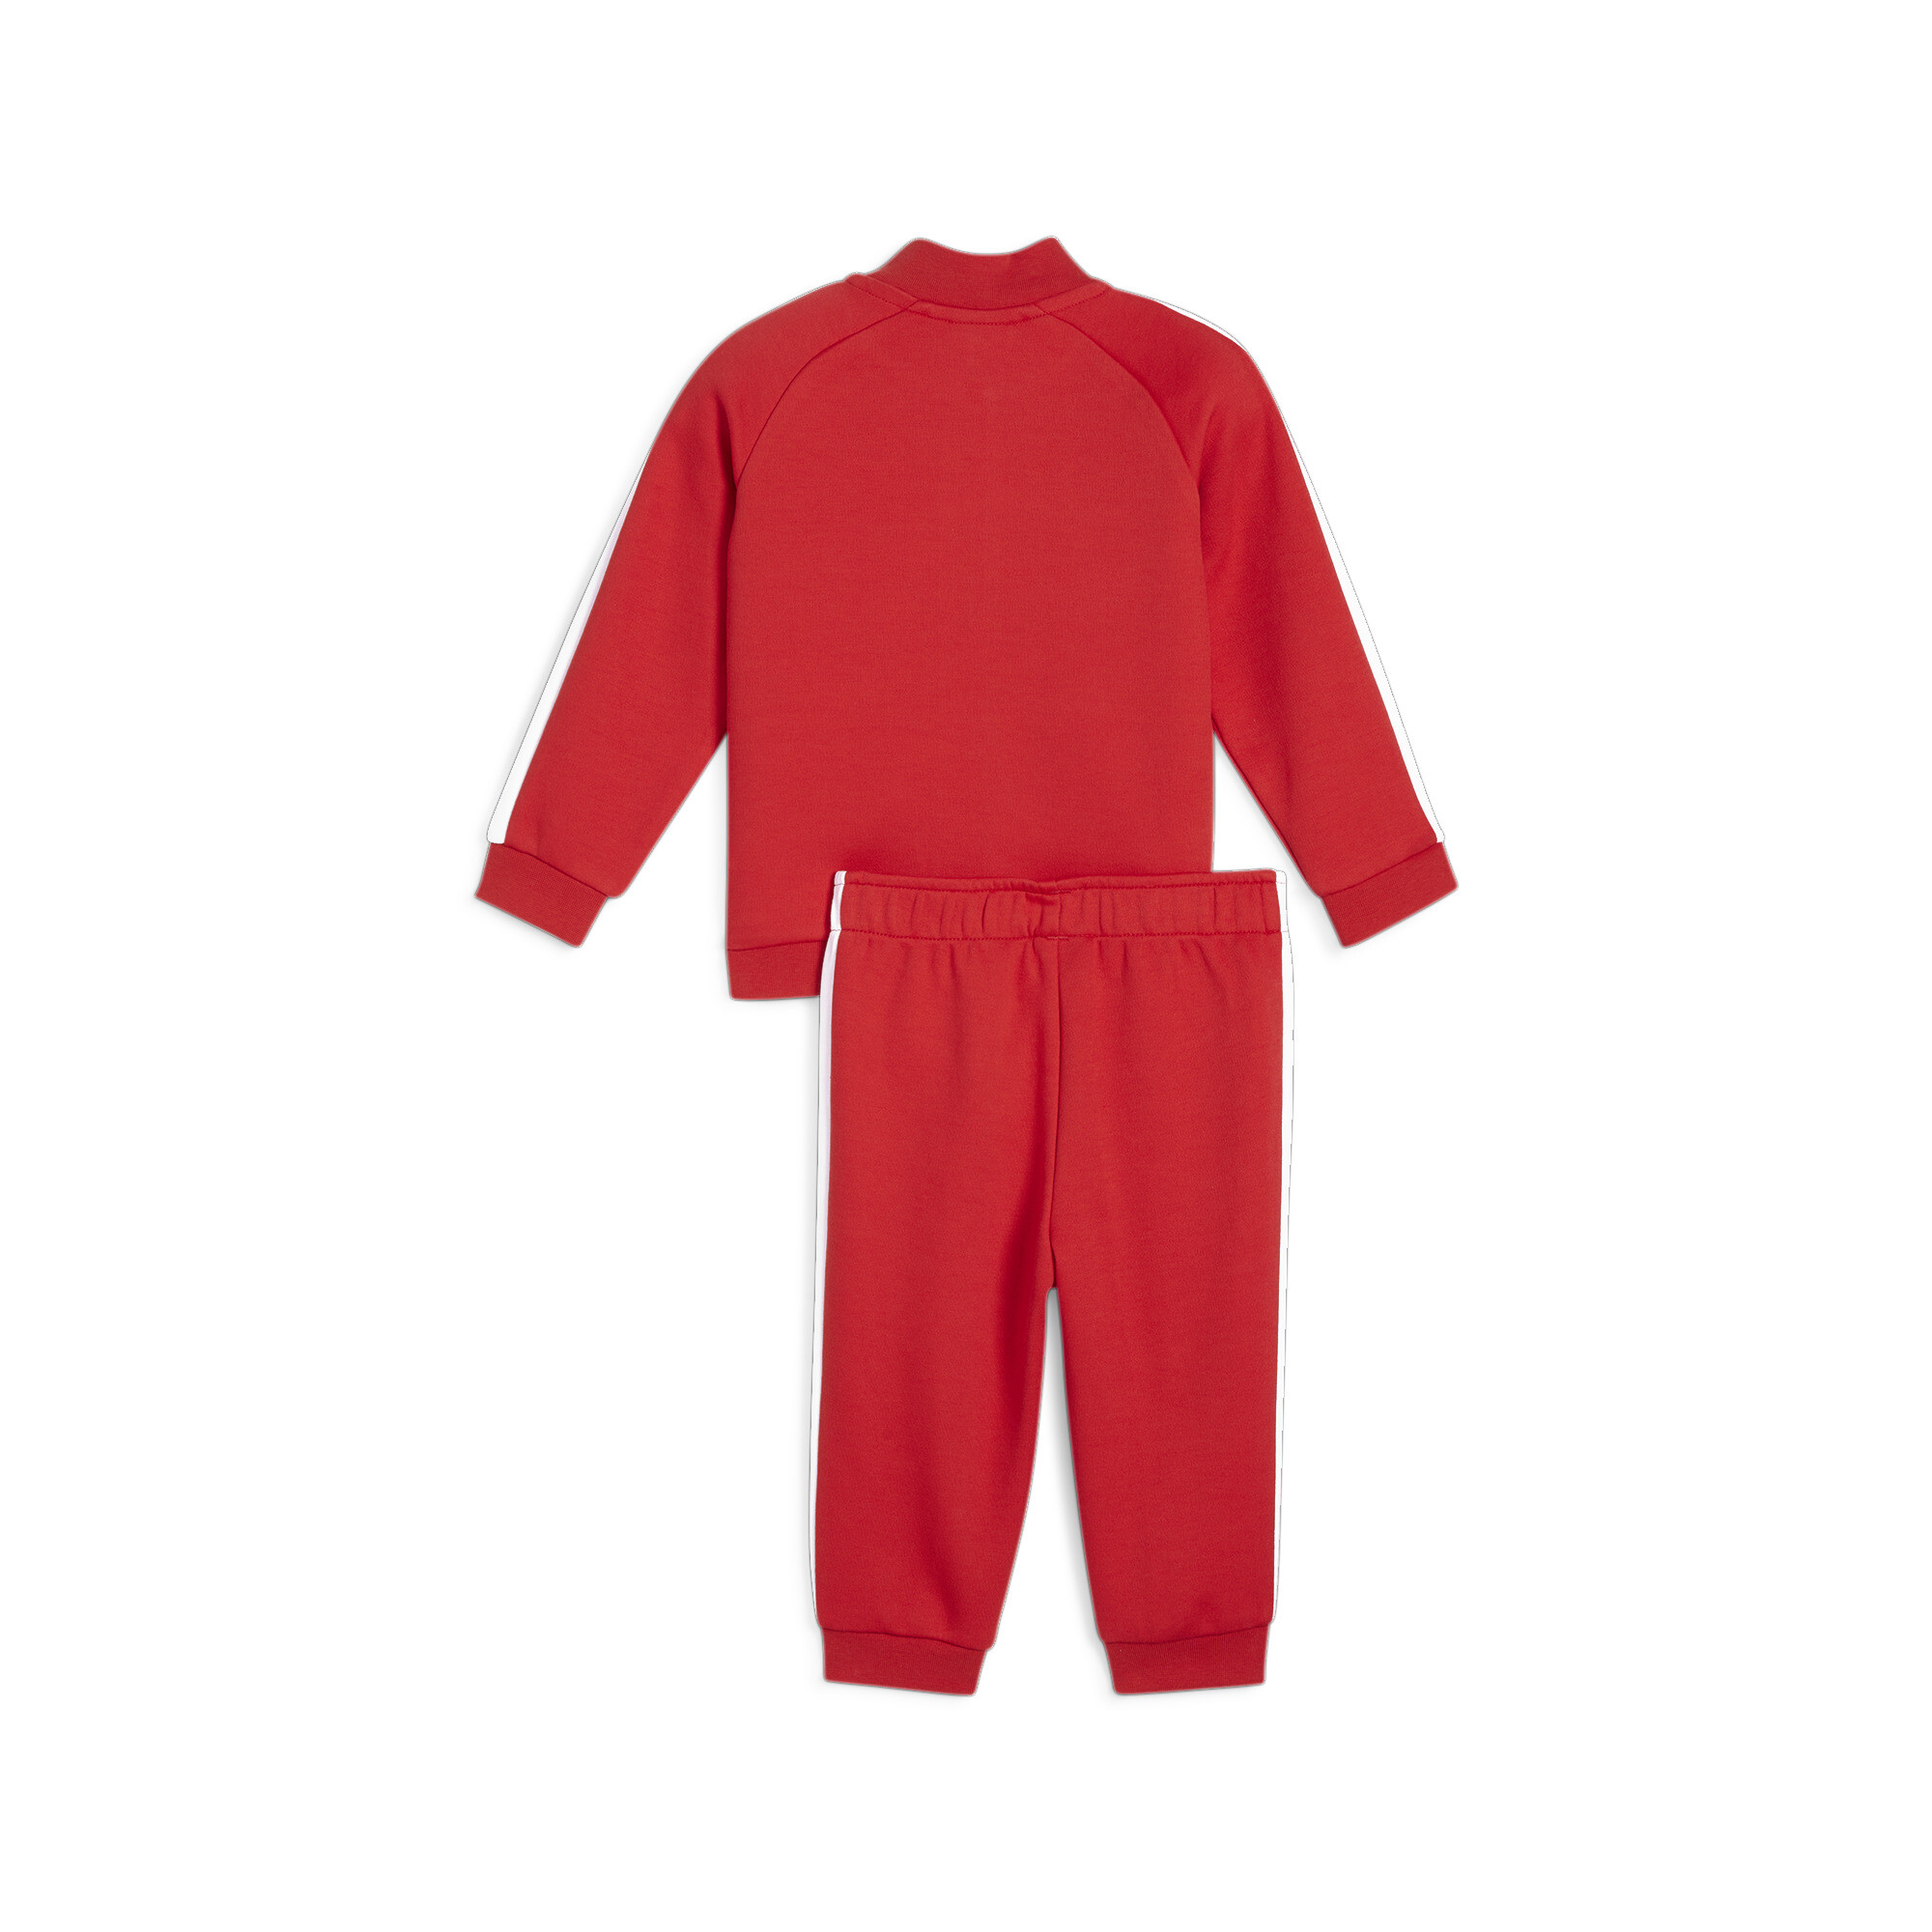 Puma MINICATS T7 ICONIC Baby Tracksuit Set, Red, Size 2-3Y, Clothing